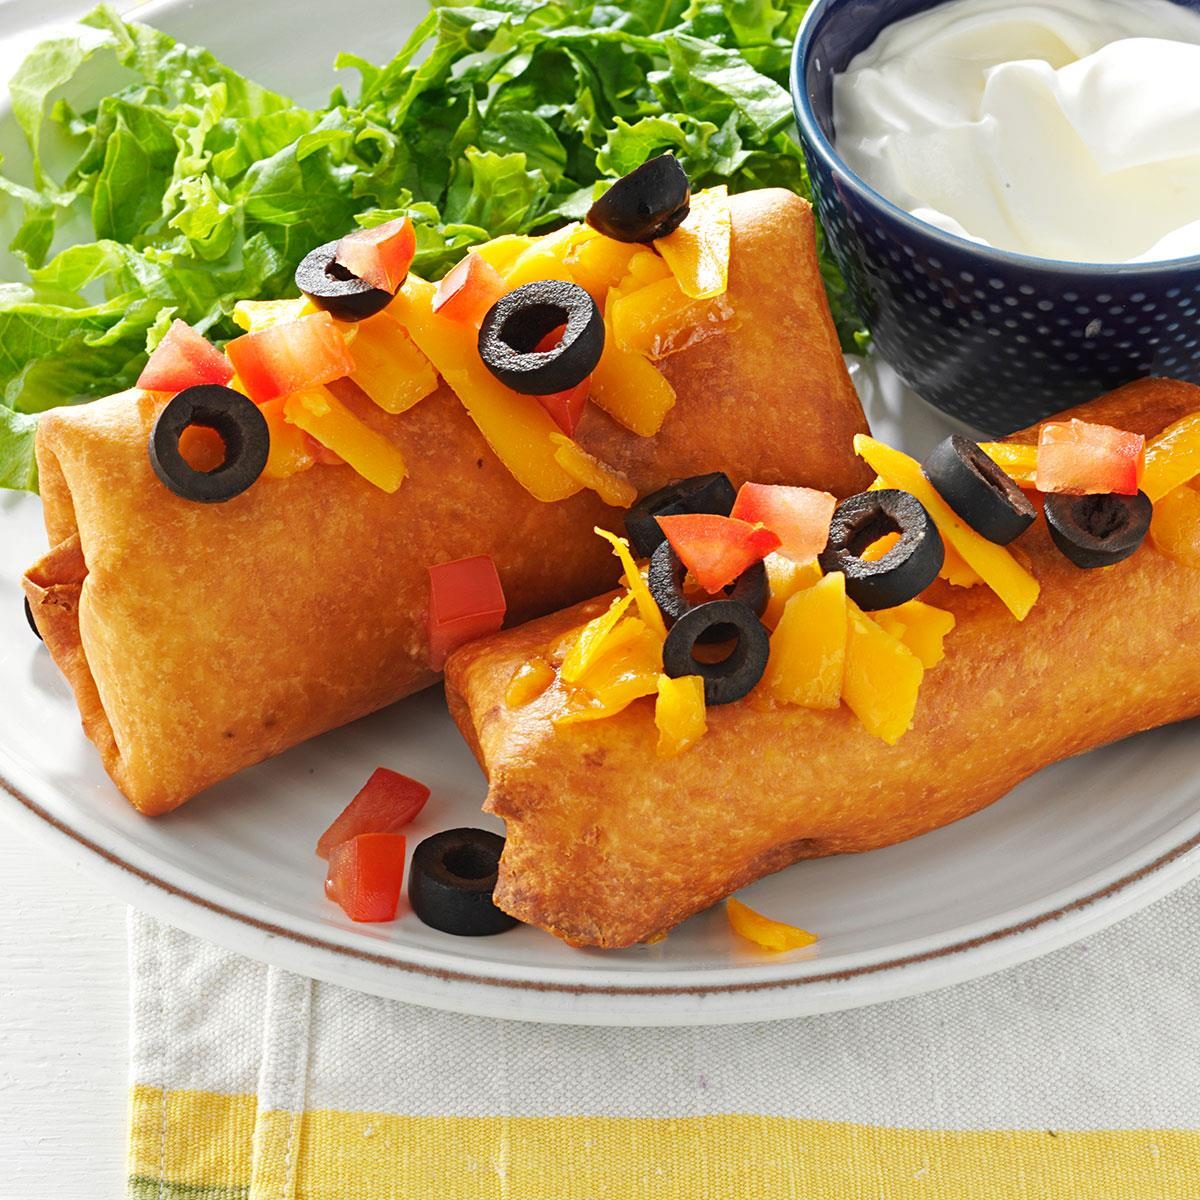 Beef and Bean Chimichangas - $5 Dinners